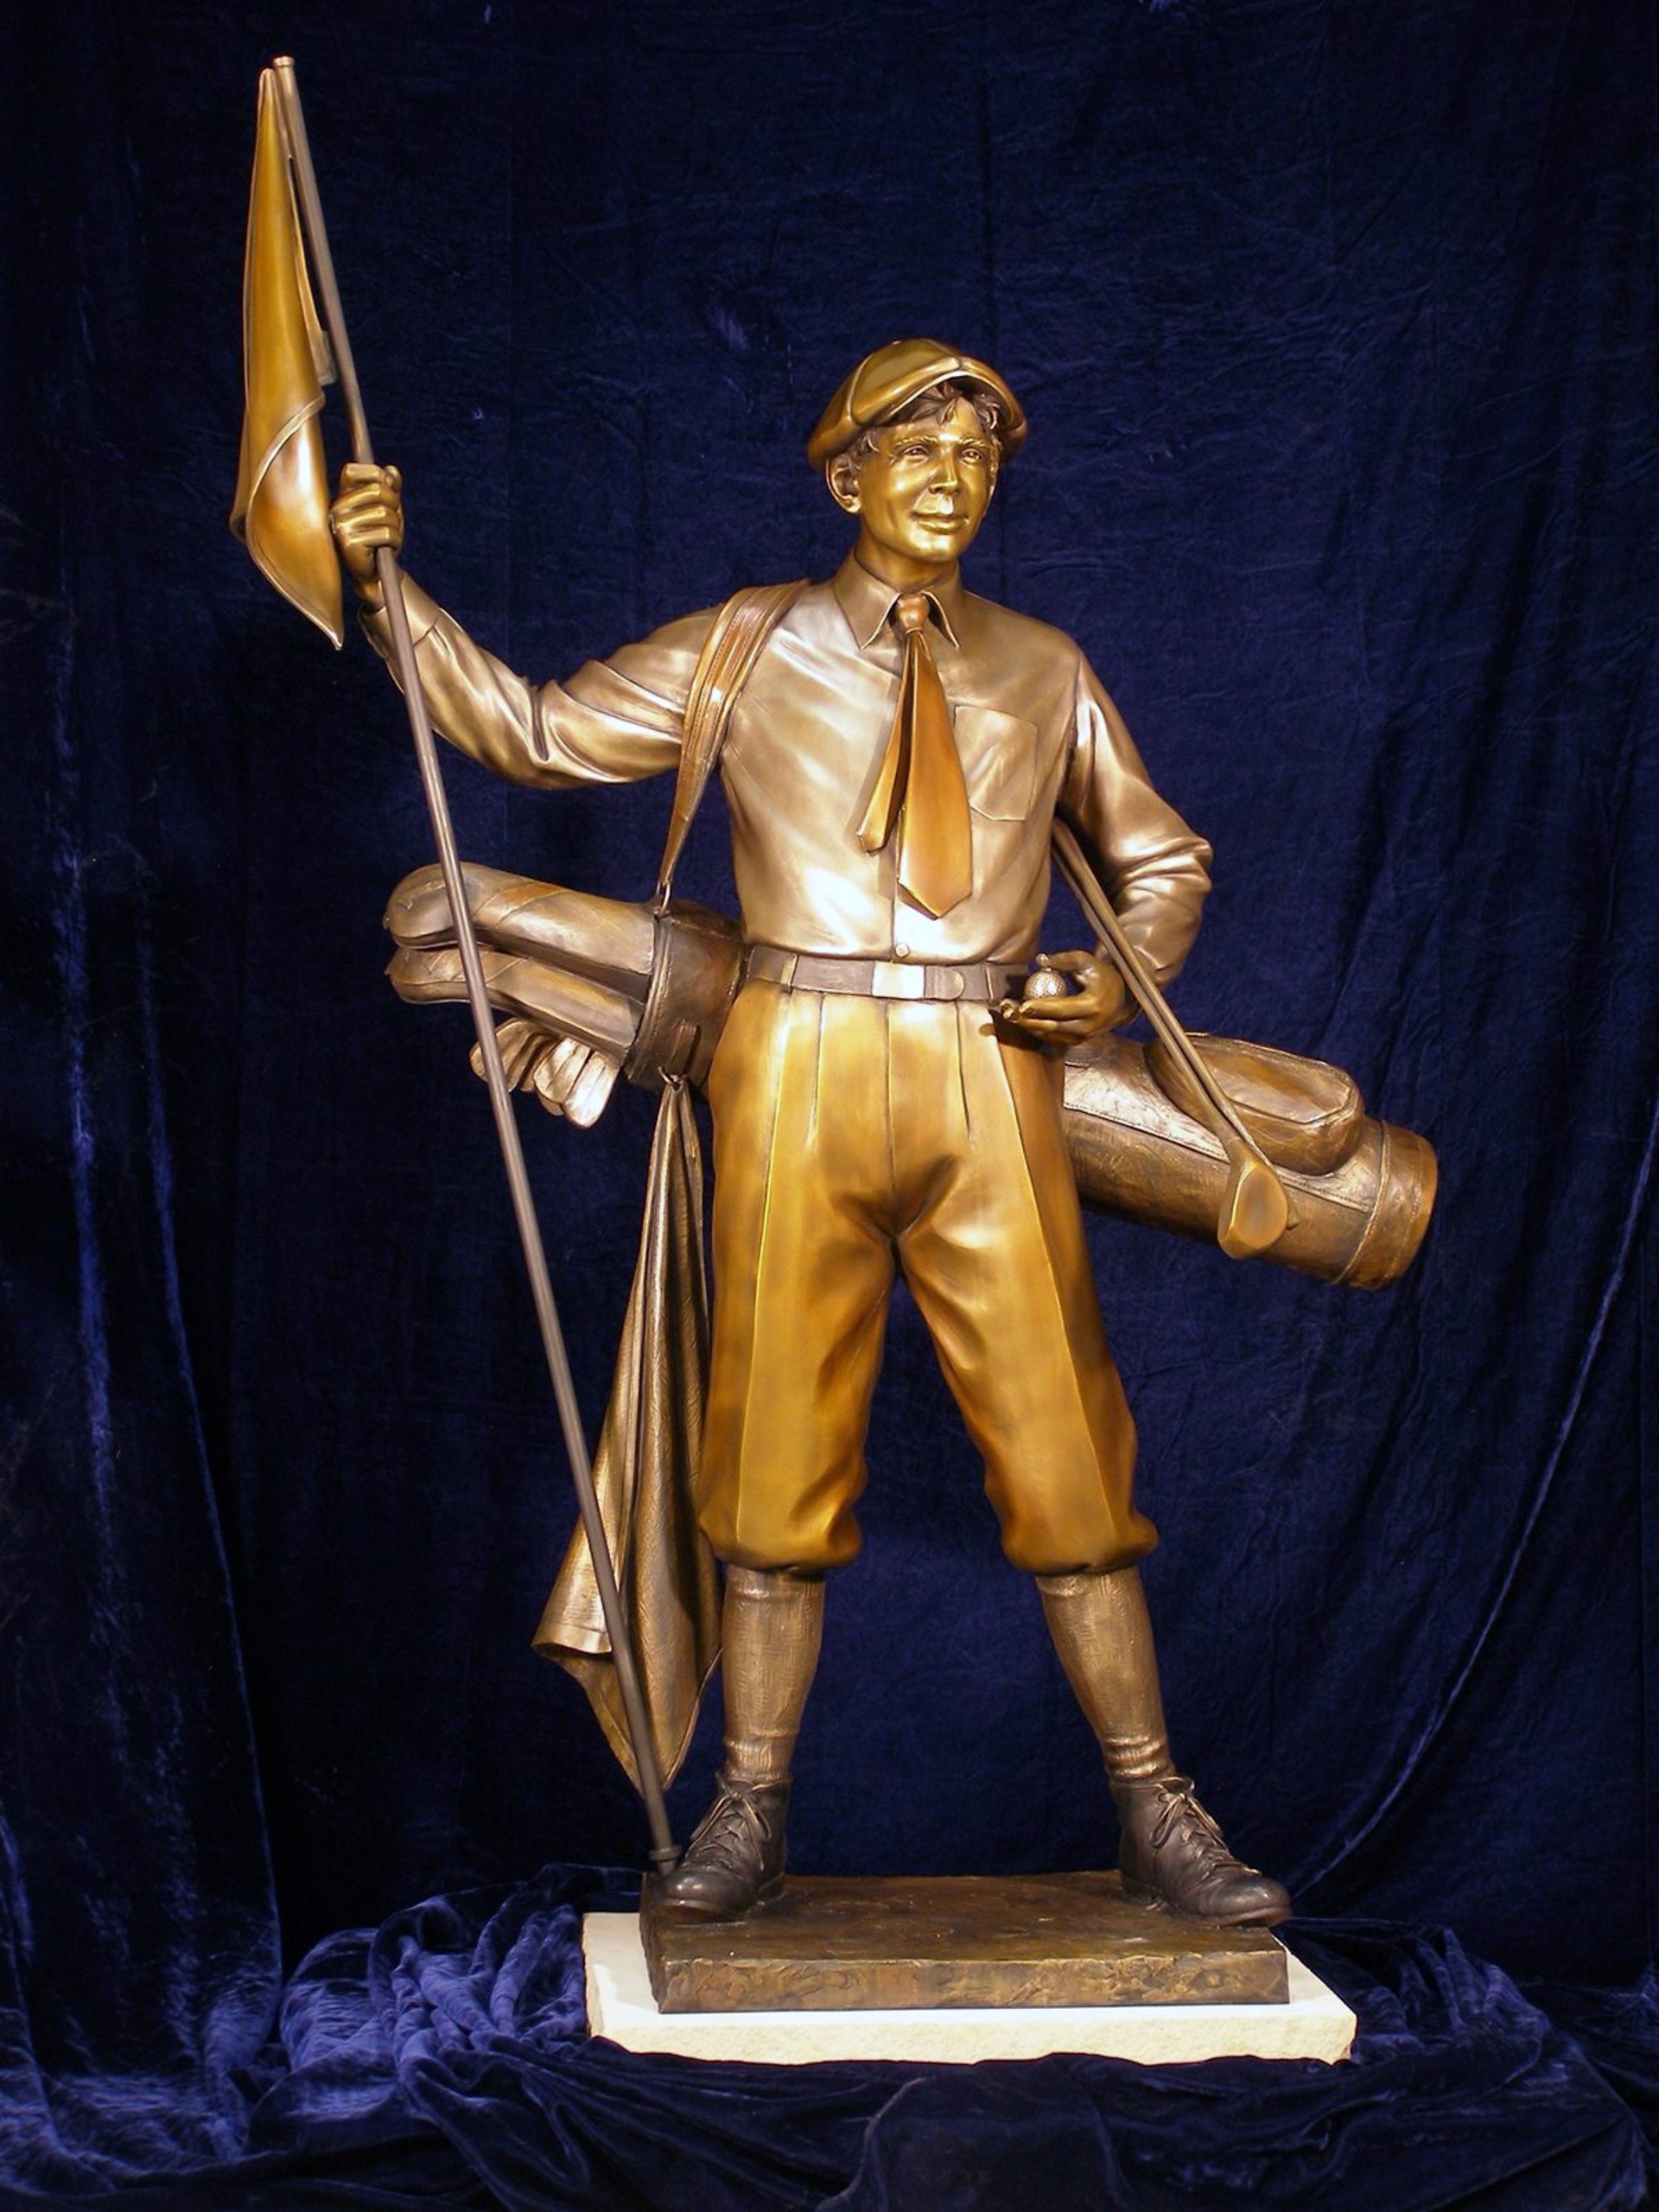 Caddy (lifesize) by George Lundeen